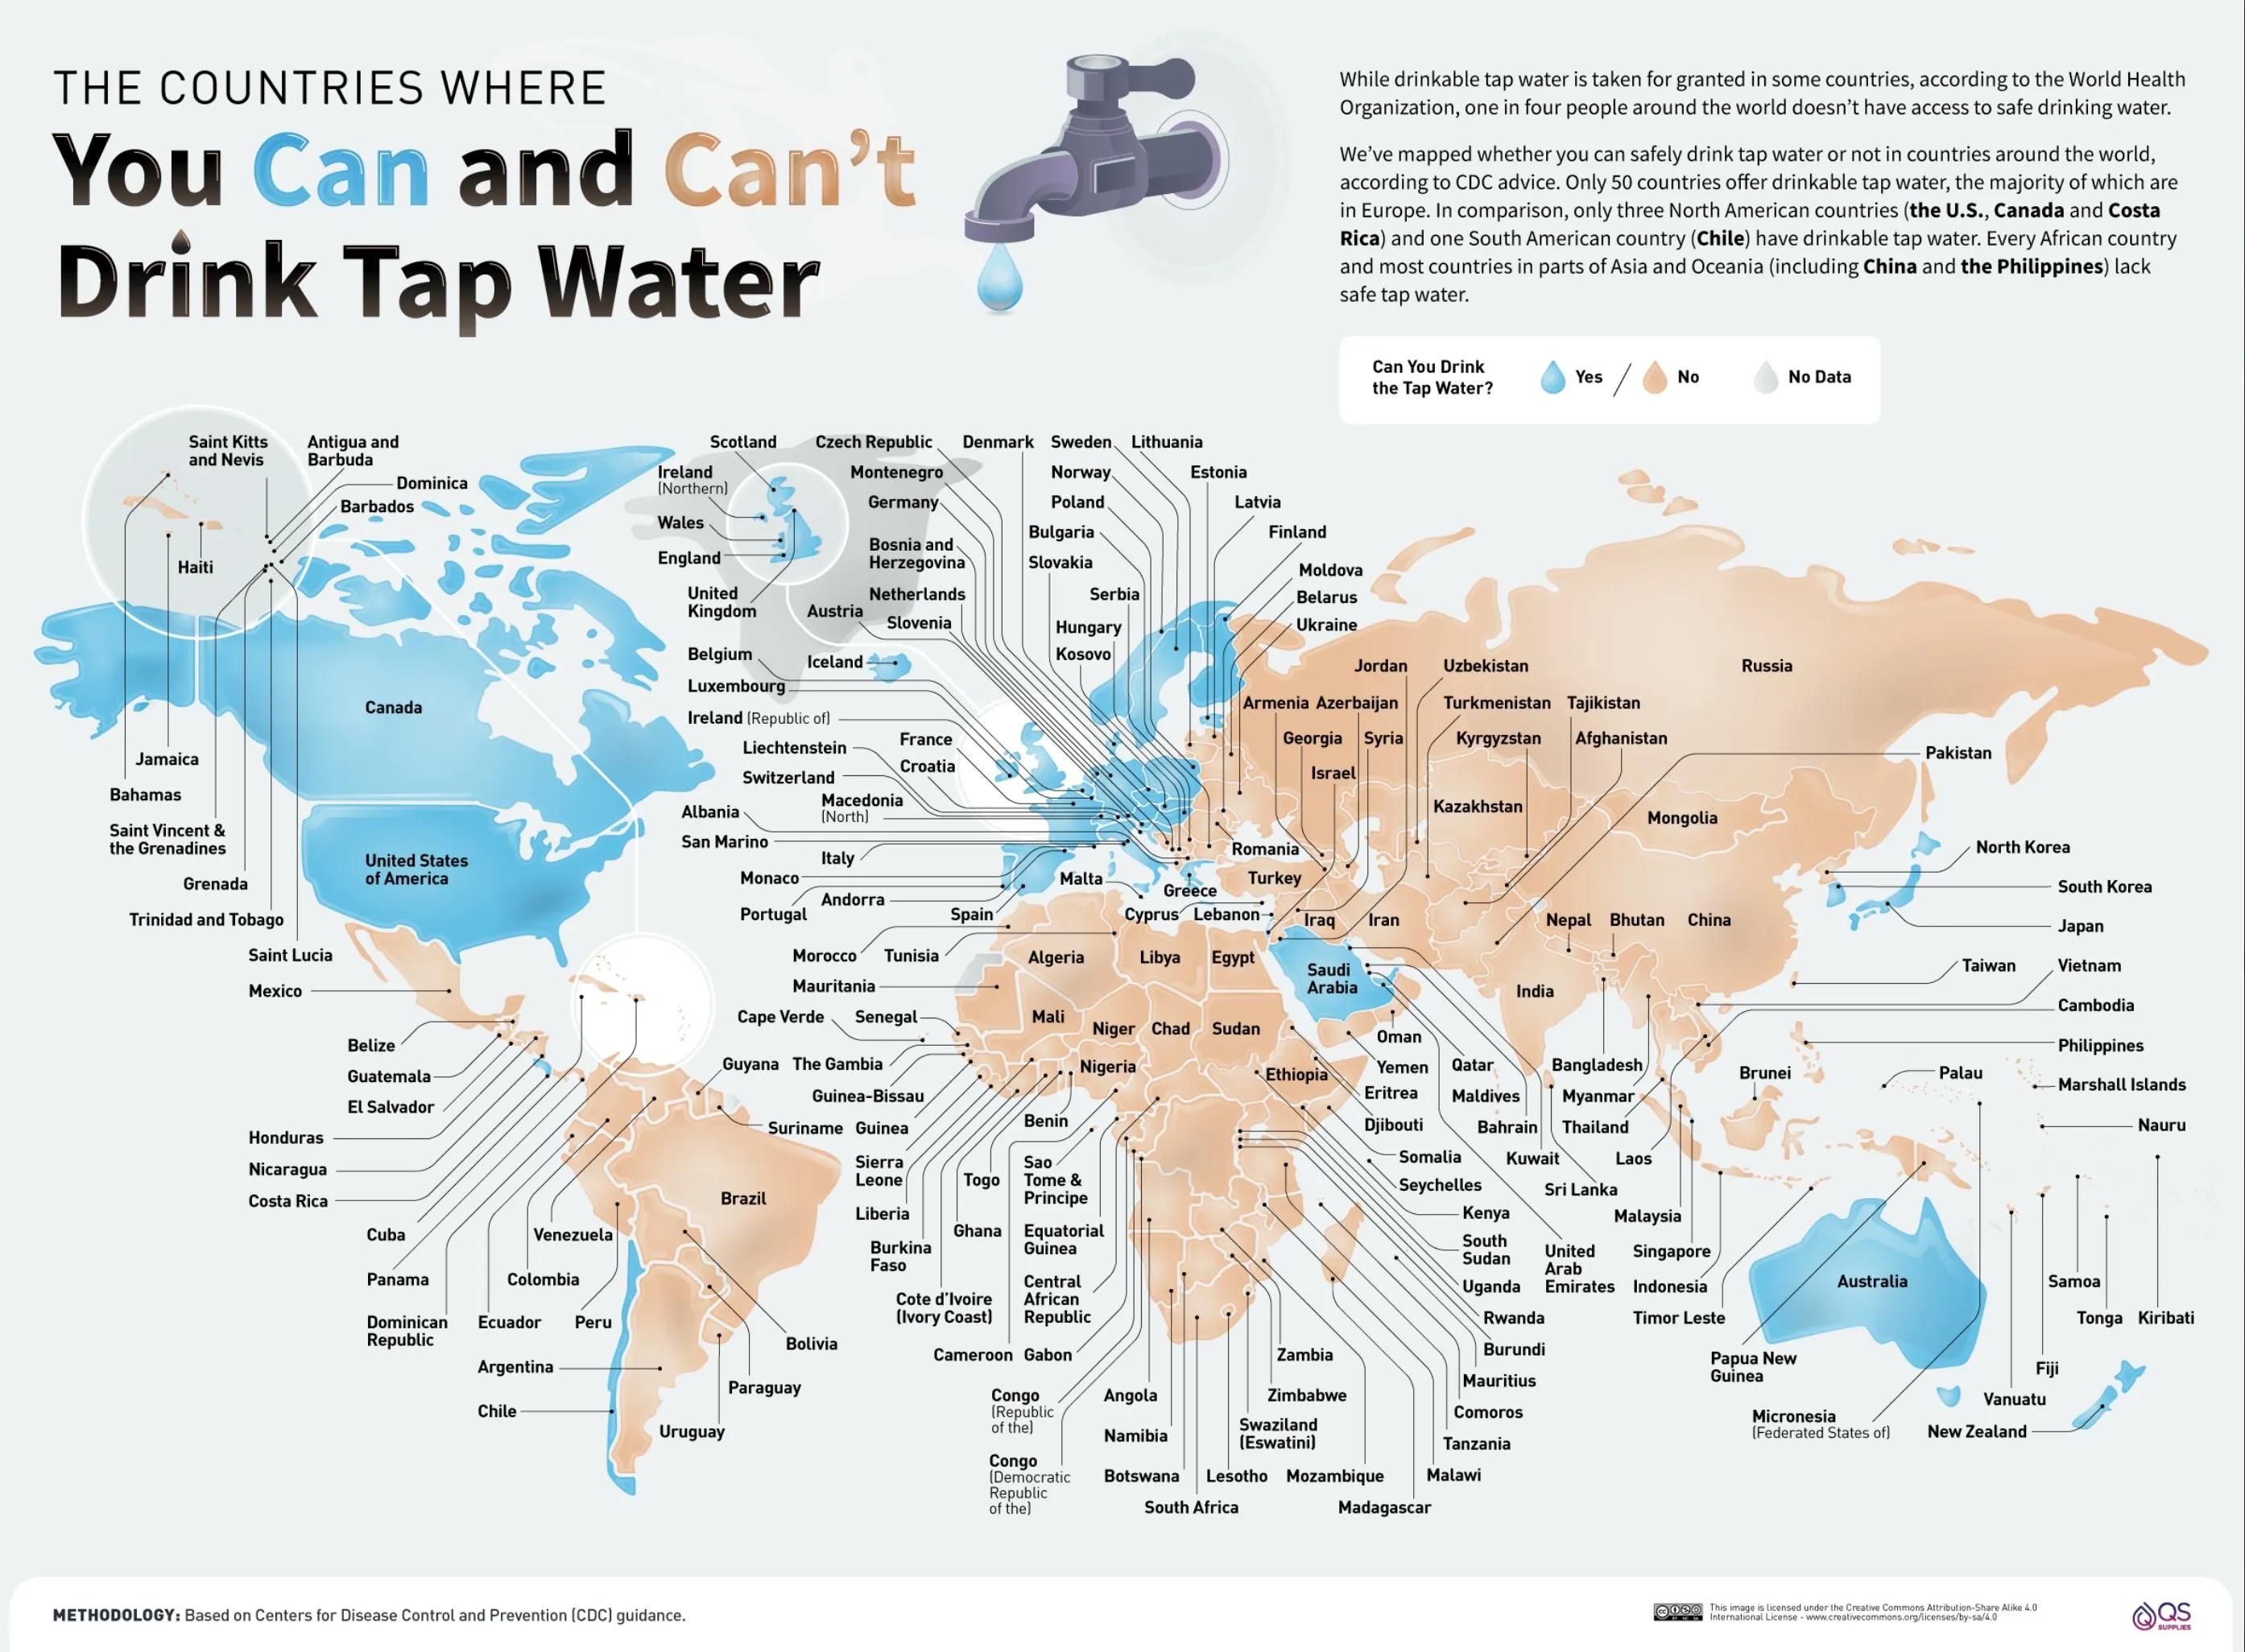 Where in the world is it safe to drink tap water